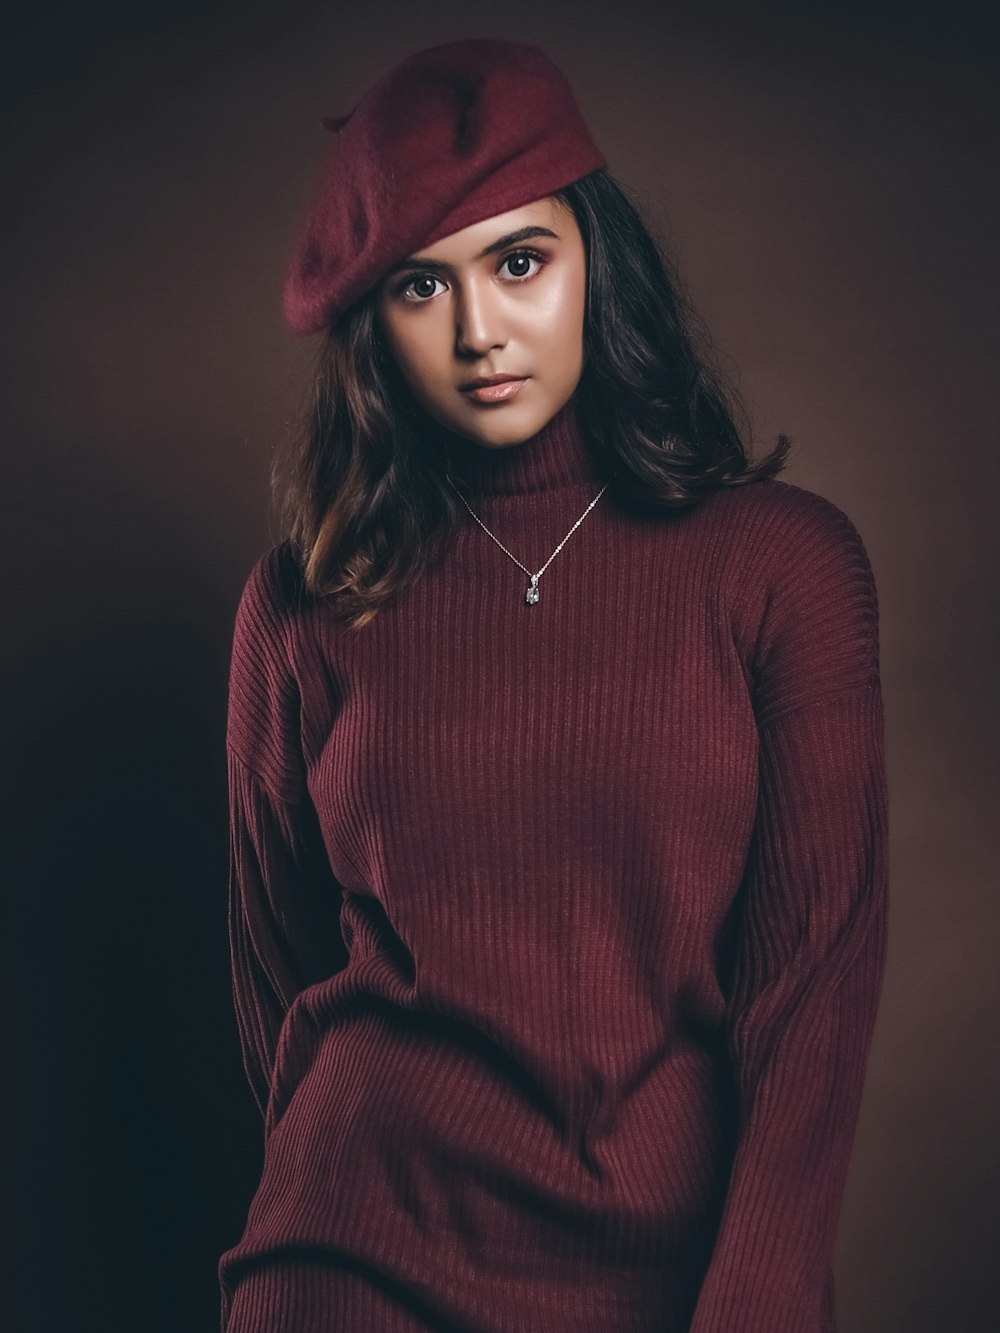 a woman wearing a red sweater and a red hat